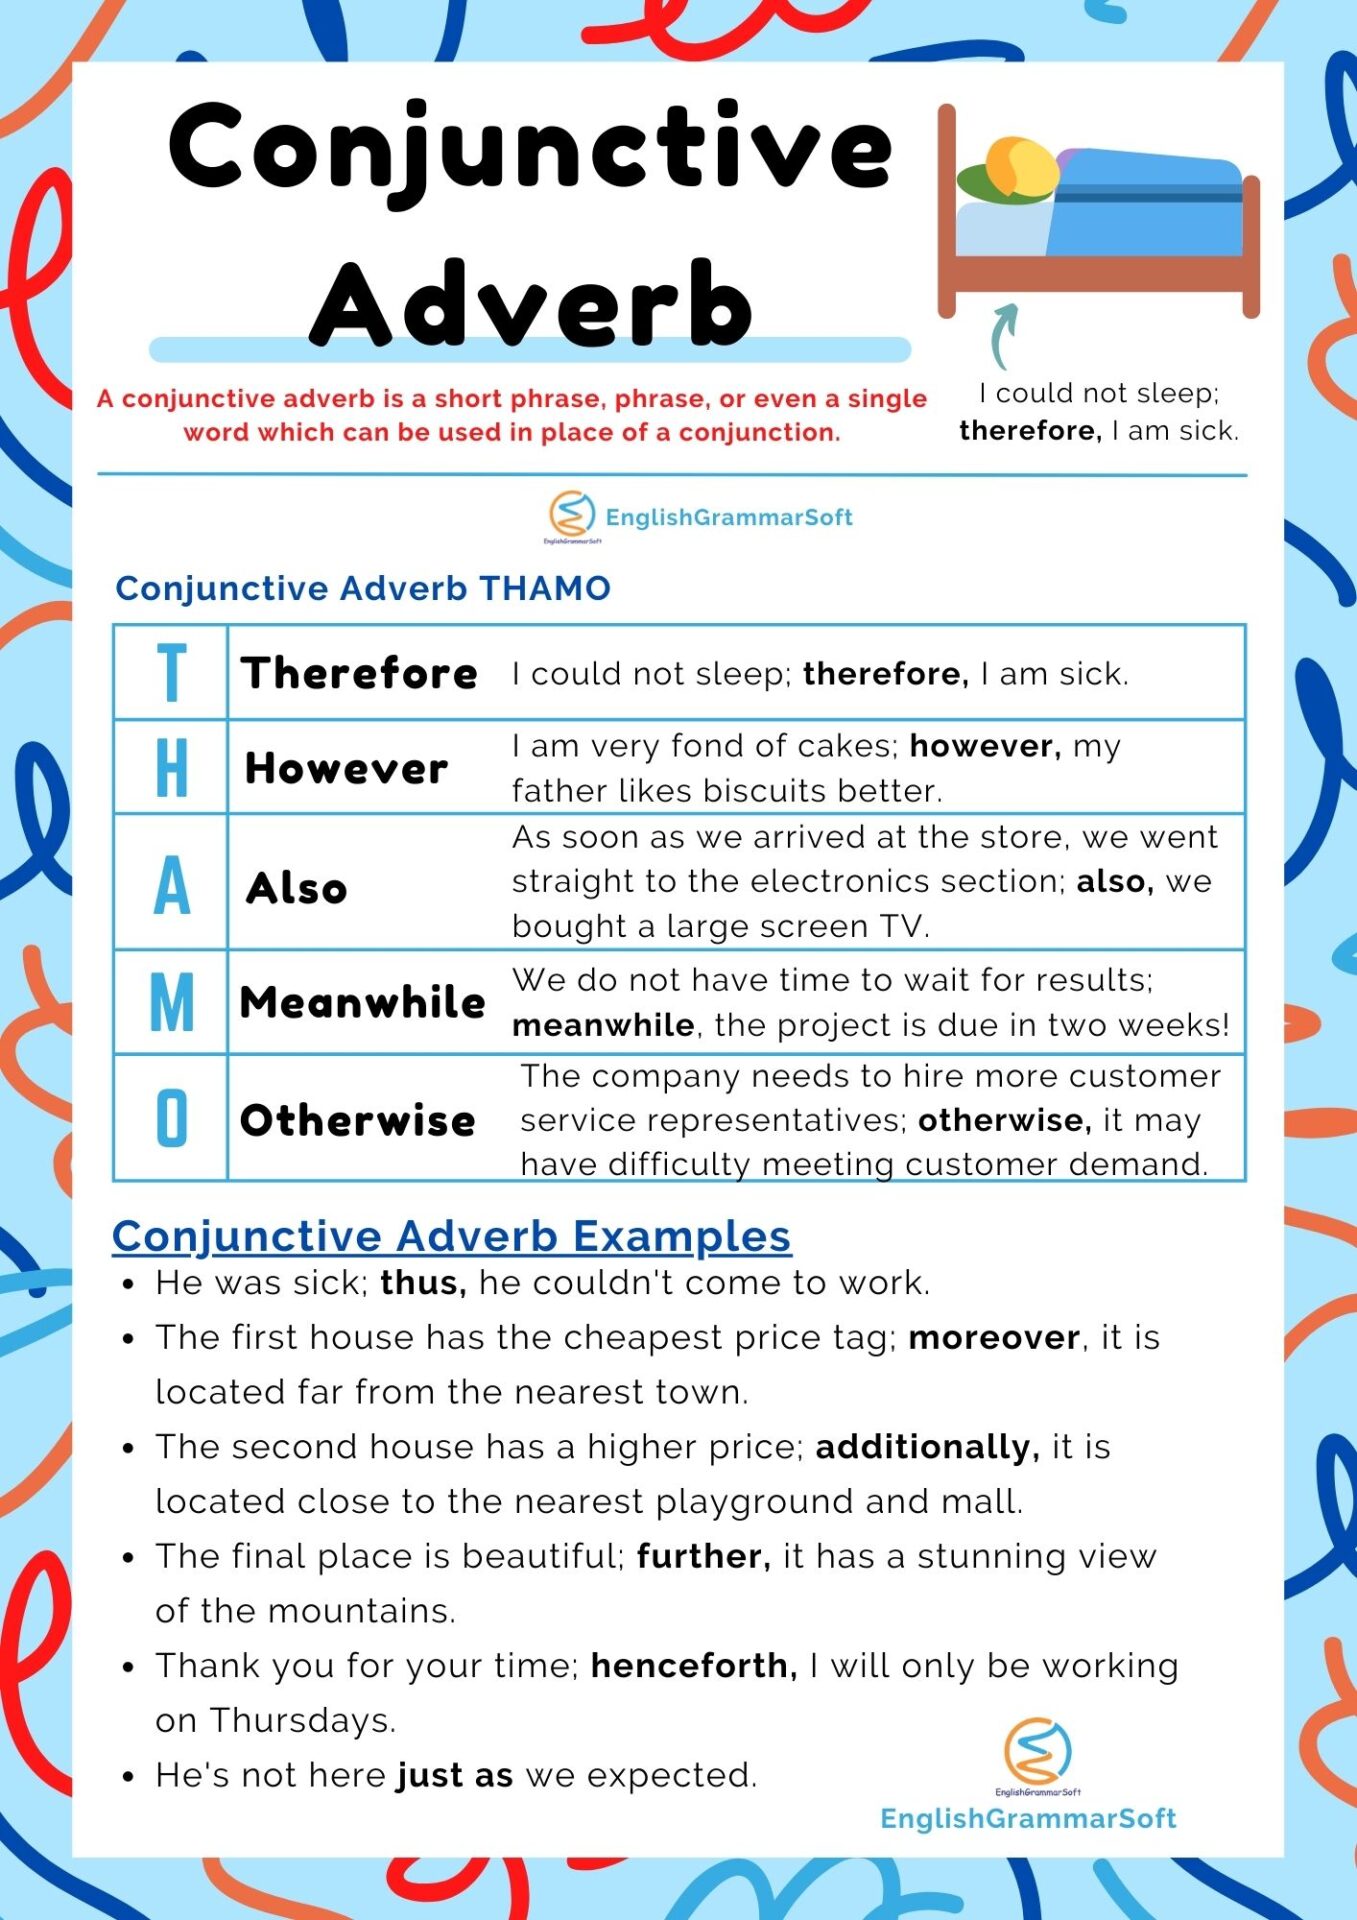 Conjunctive Adverb Examples Thamo List Worksheets EnglishGrammarSoft